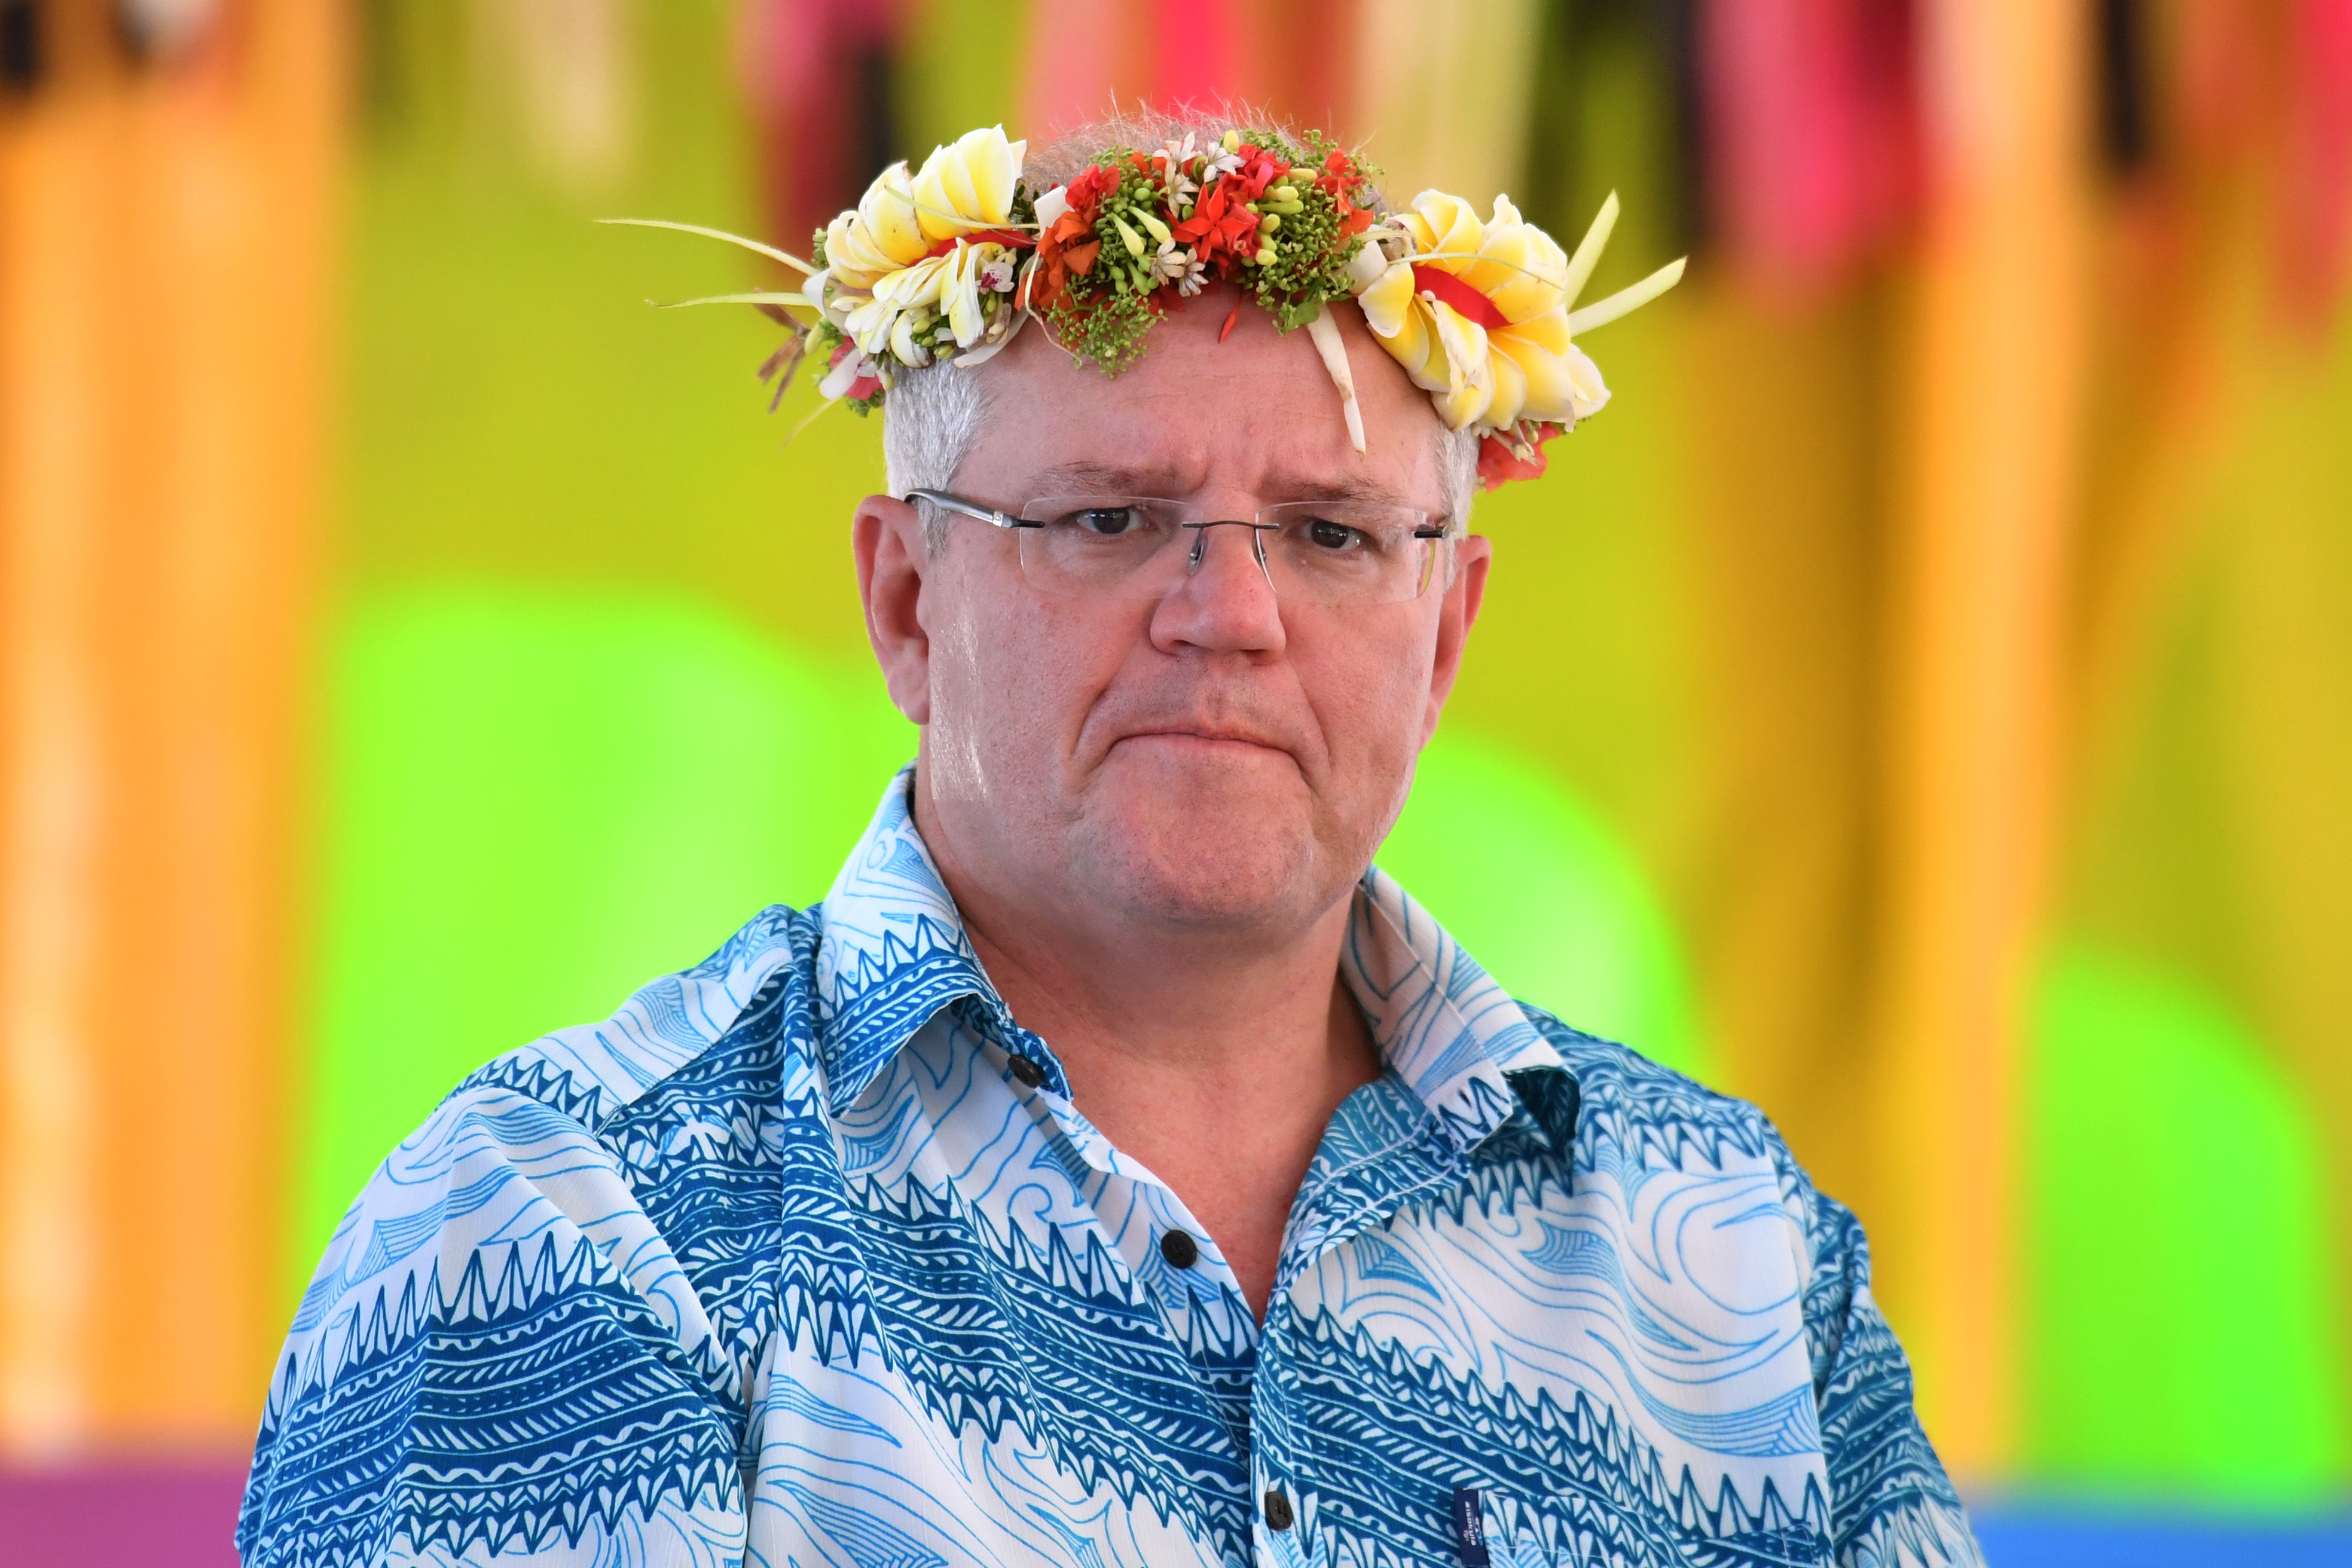 Our Climate Change Efforts Are So Piss Poor That We Made The PM Of Tonga Actually Cry